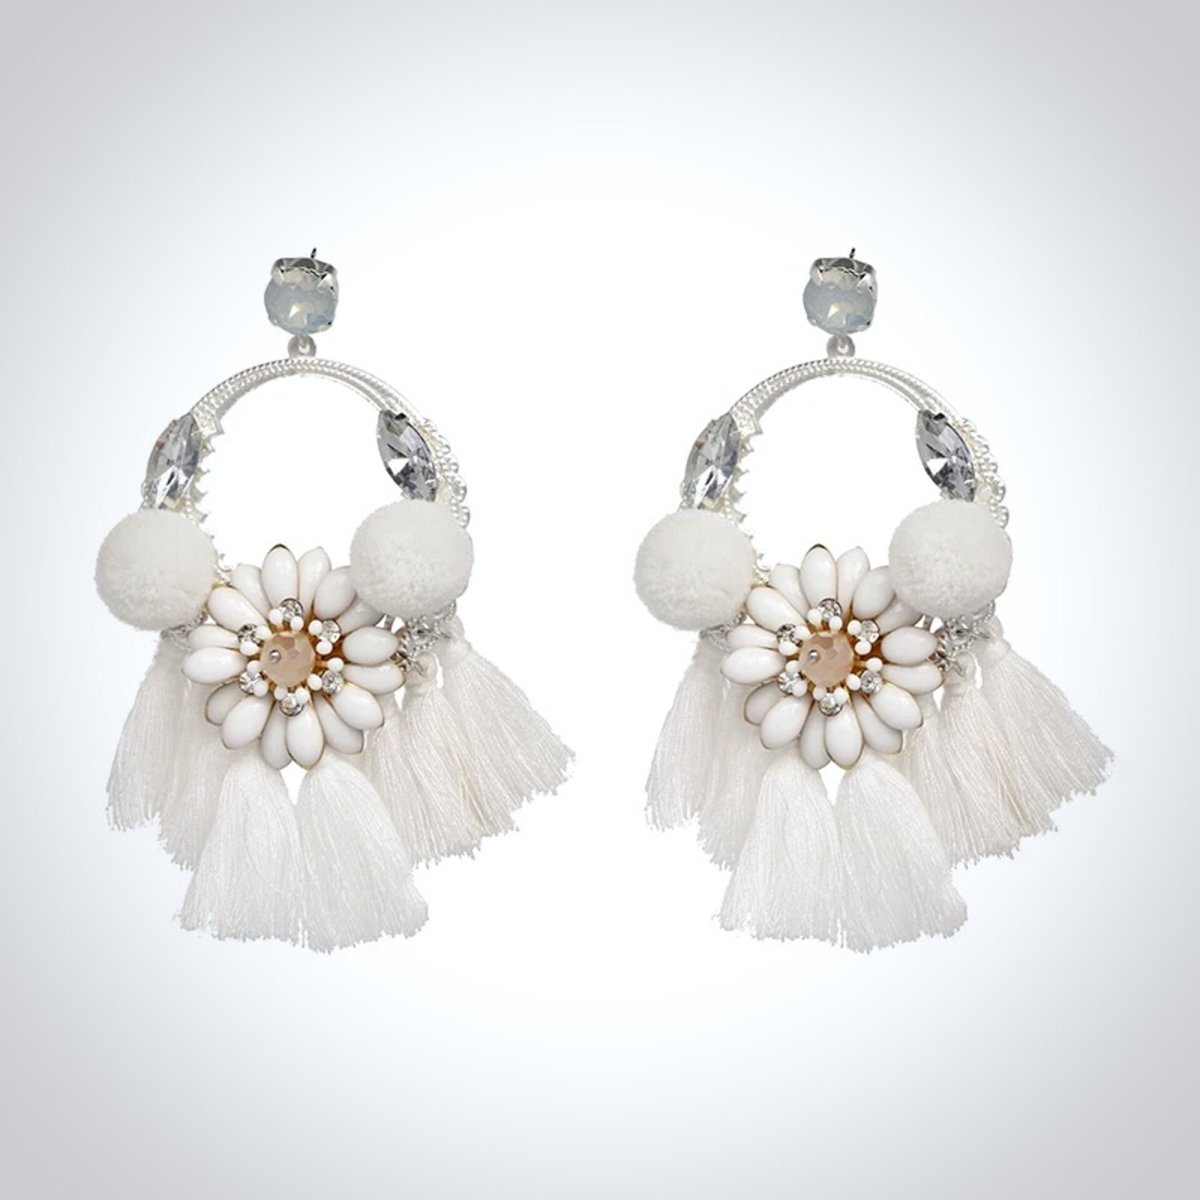 If you're not one to shy away from a major statement-making moment, these #bohemian #bridal #earrings have the wow-factor that you've been looking for.
Available here: adorabysimona.com/products/kalin…
.
.
.
#2024weddingtrends #bohemianwedding #wedding #bridaljewelry #adorabysimona